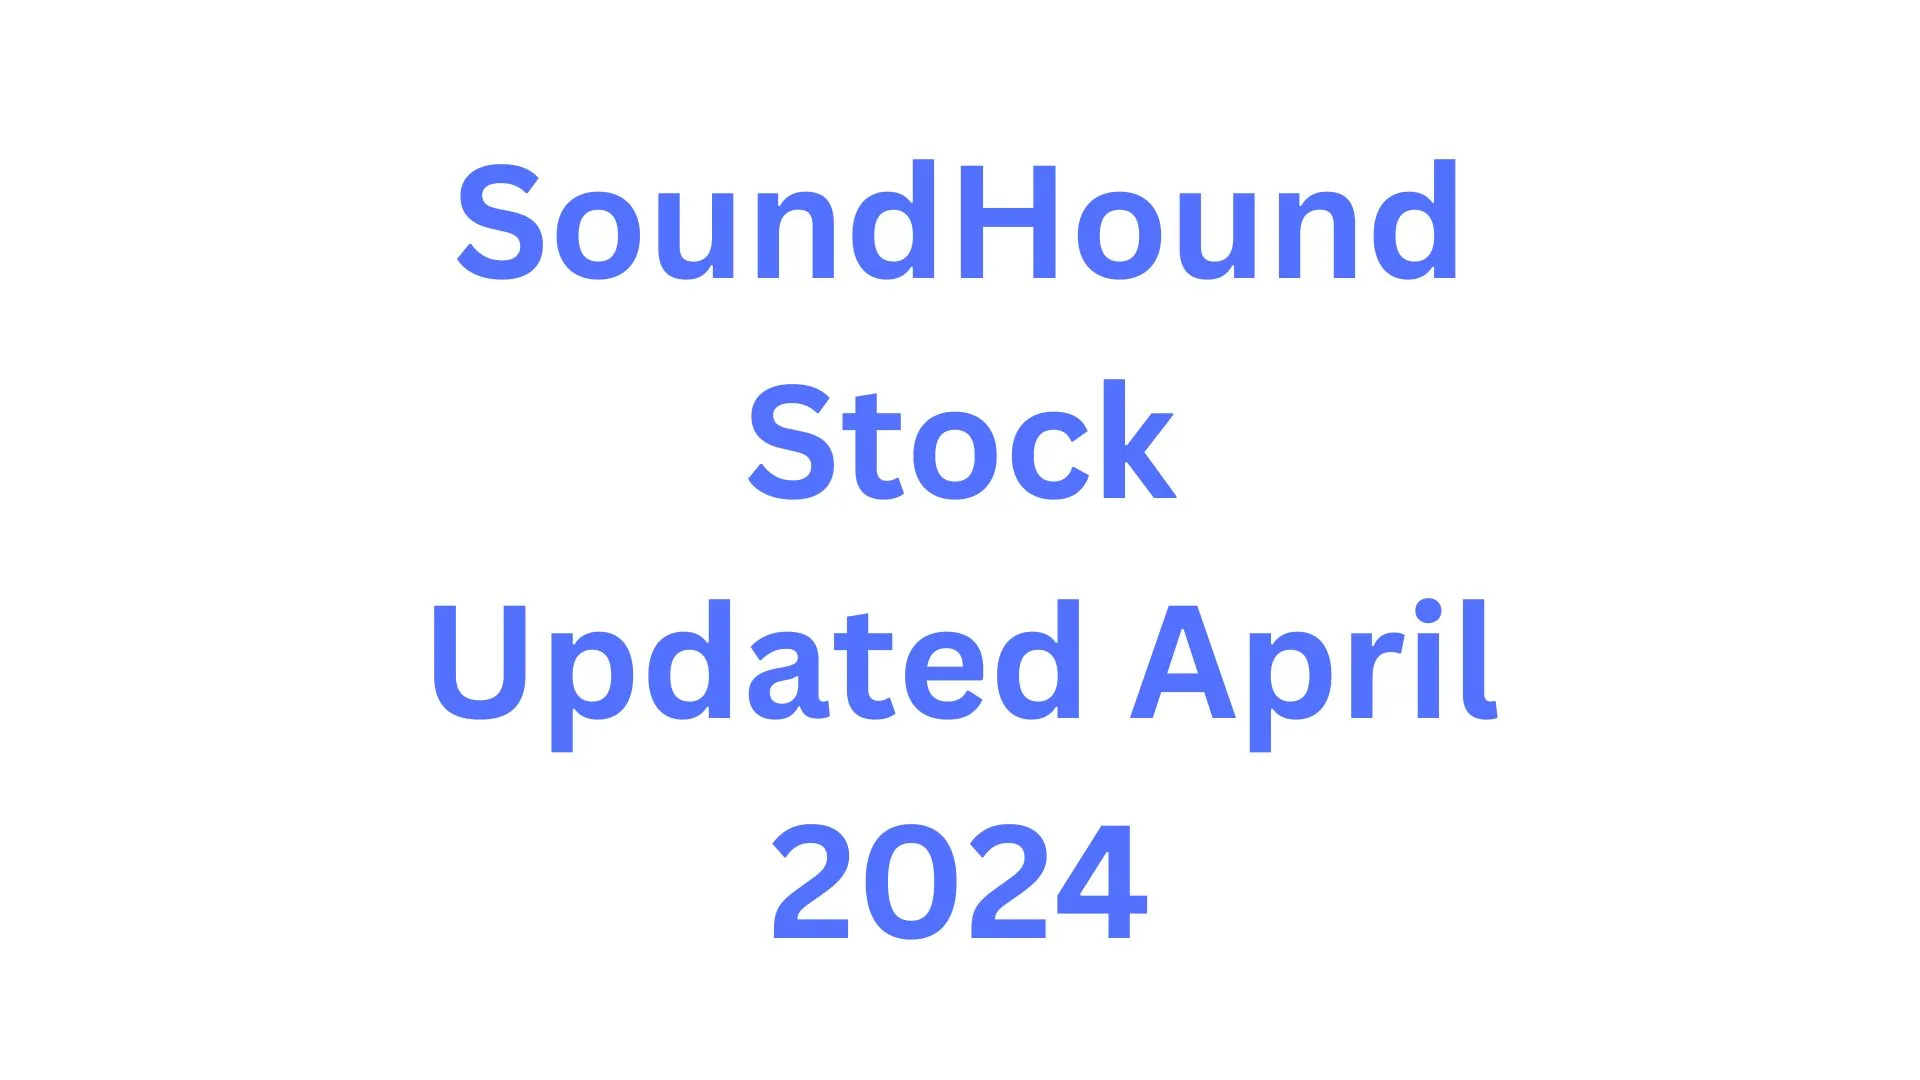 SoundHound Stock - Updated April 2024